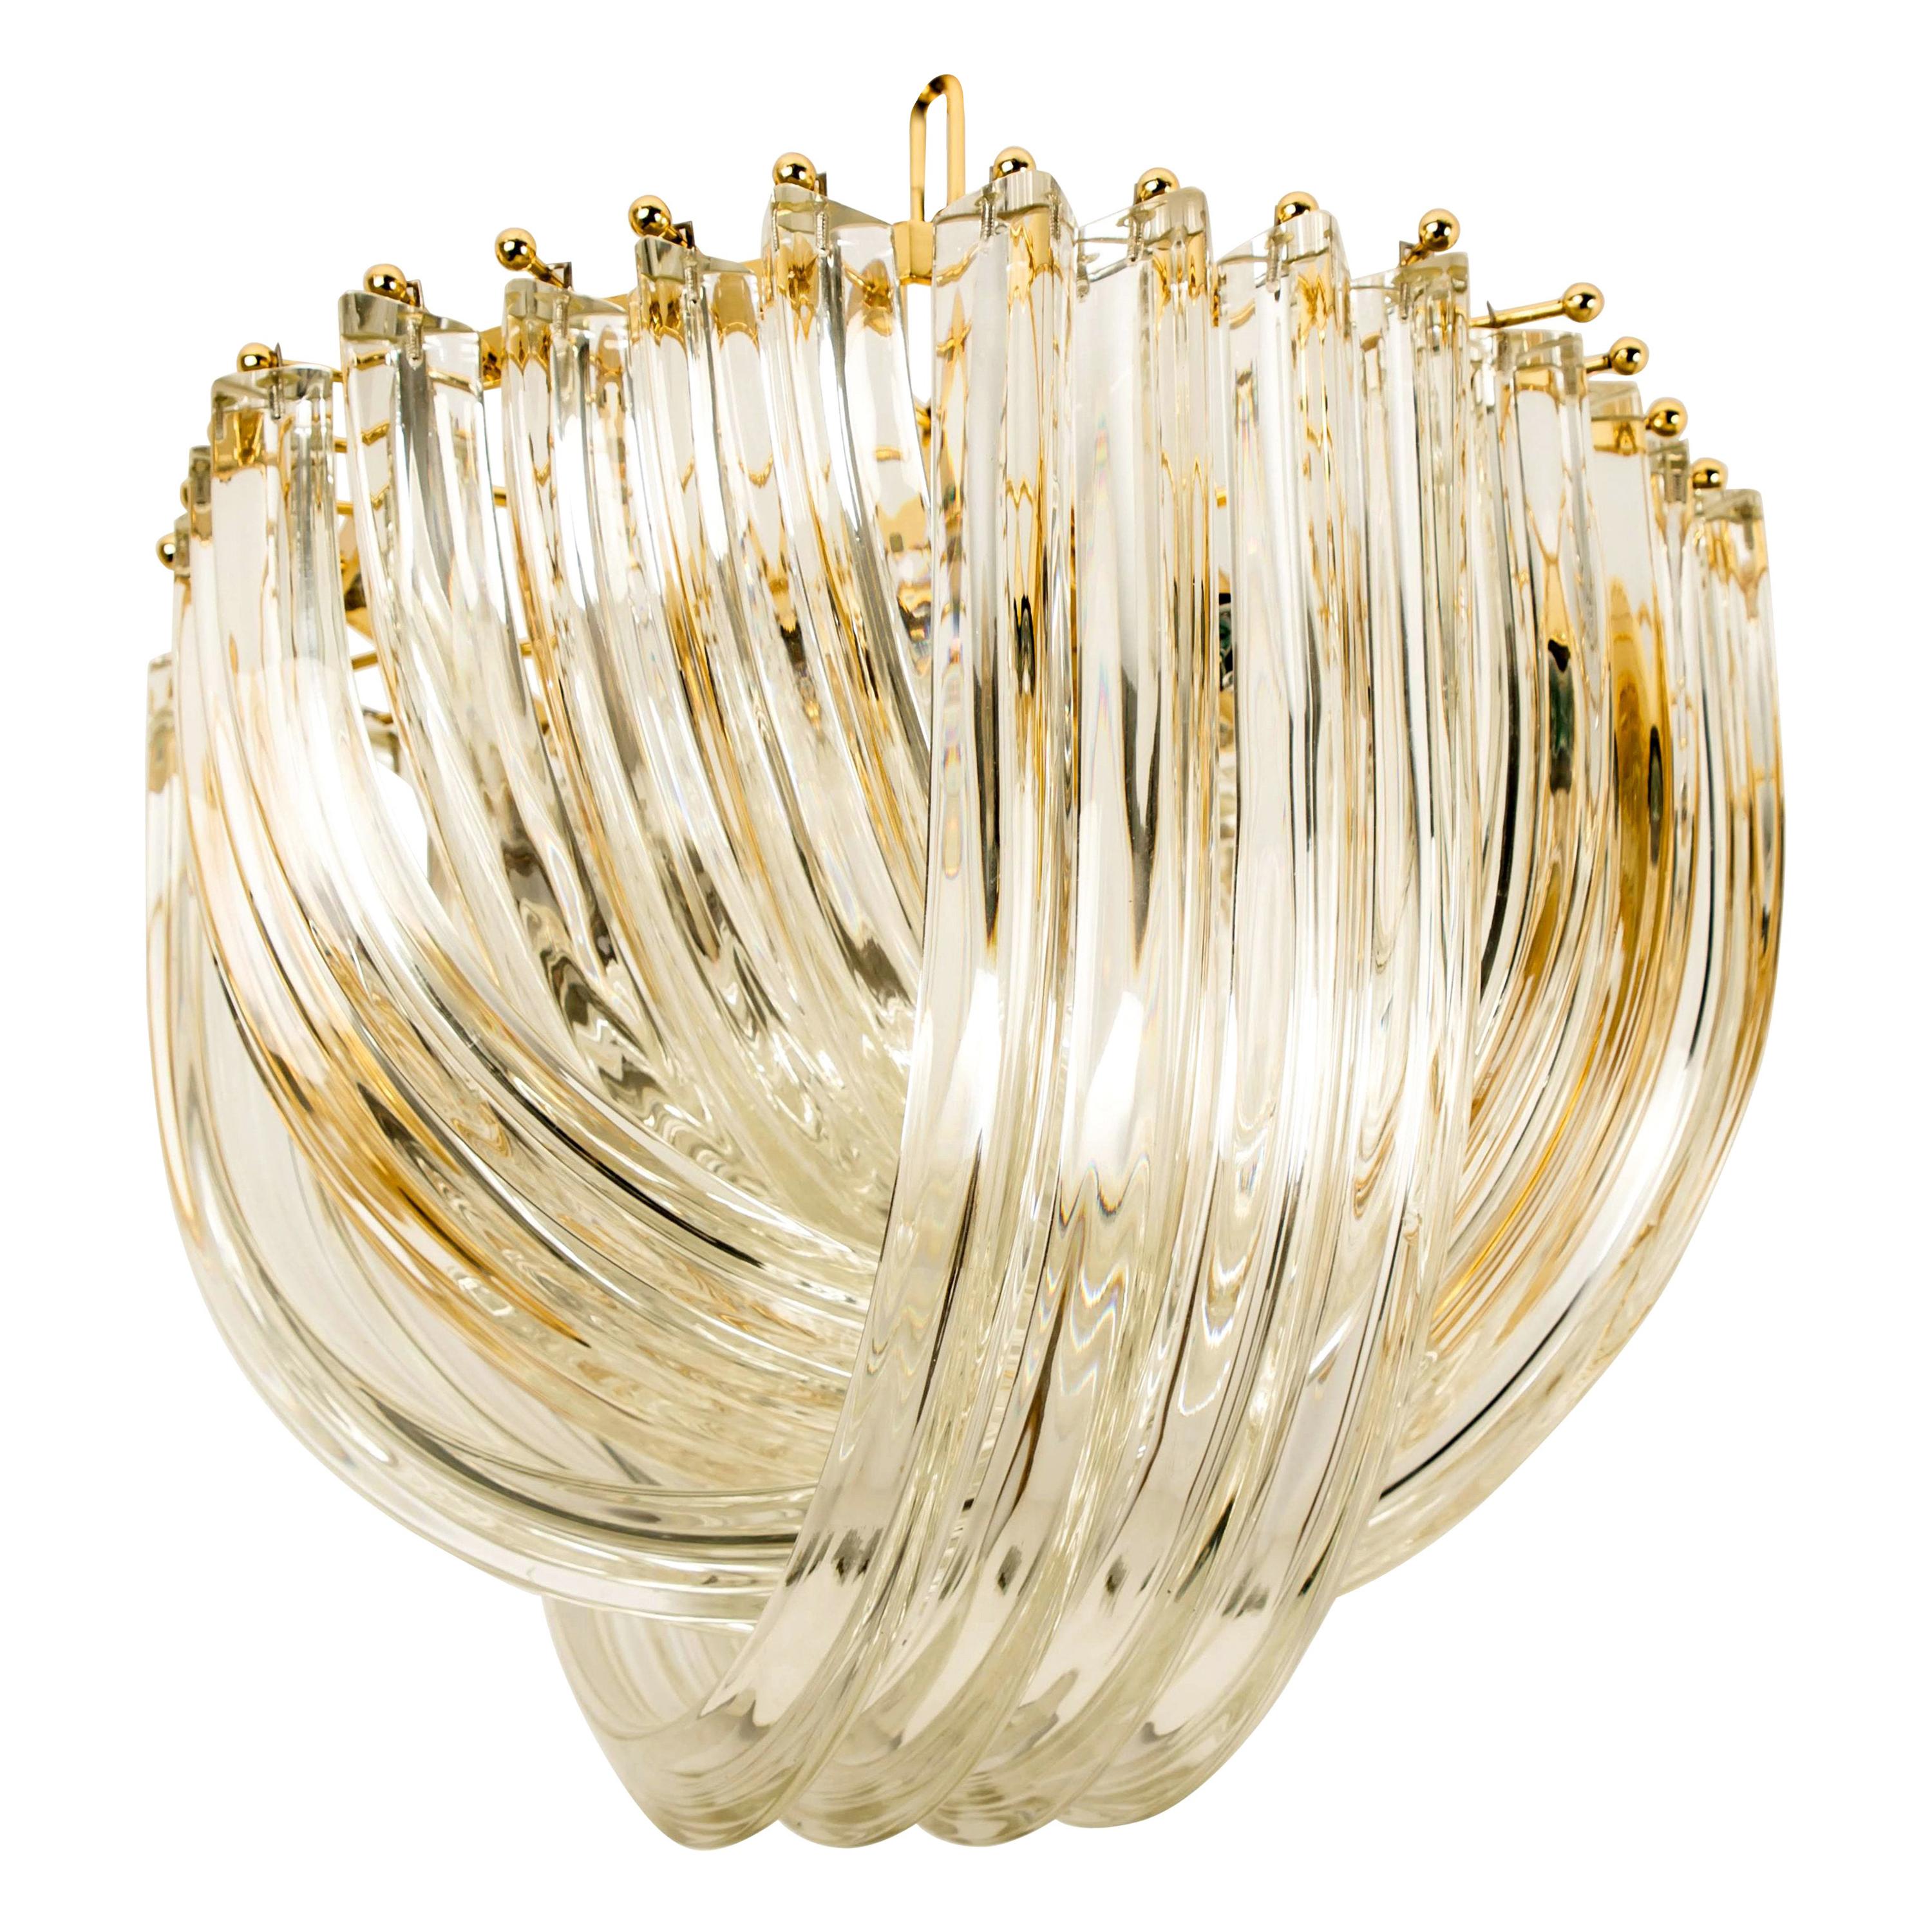 A pair impressive light fixtures by Venini, Italy, manufactured in circa 1970 (late 1960s-early 1970s). A handmade and high quality piece. Large curved crystal Murano glasses in different length mounted on a gold-plated brass frame. The crystals are